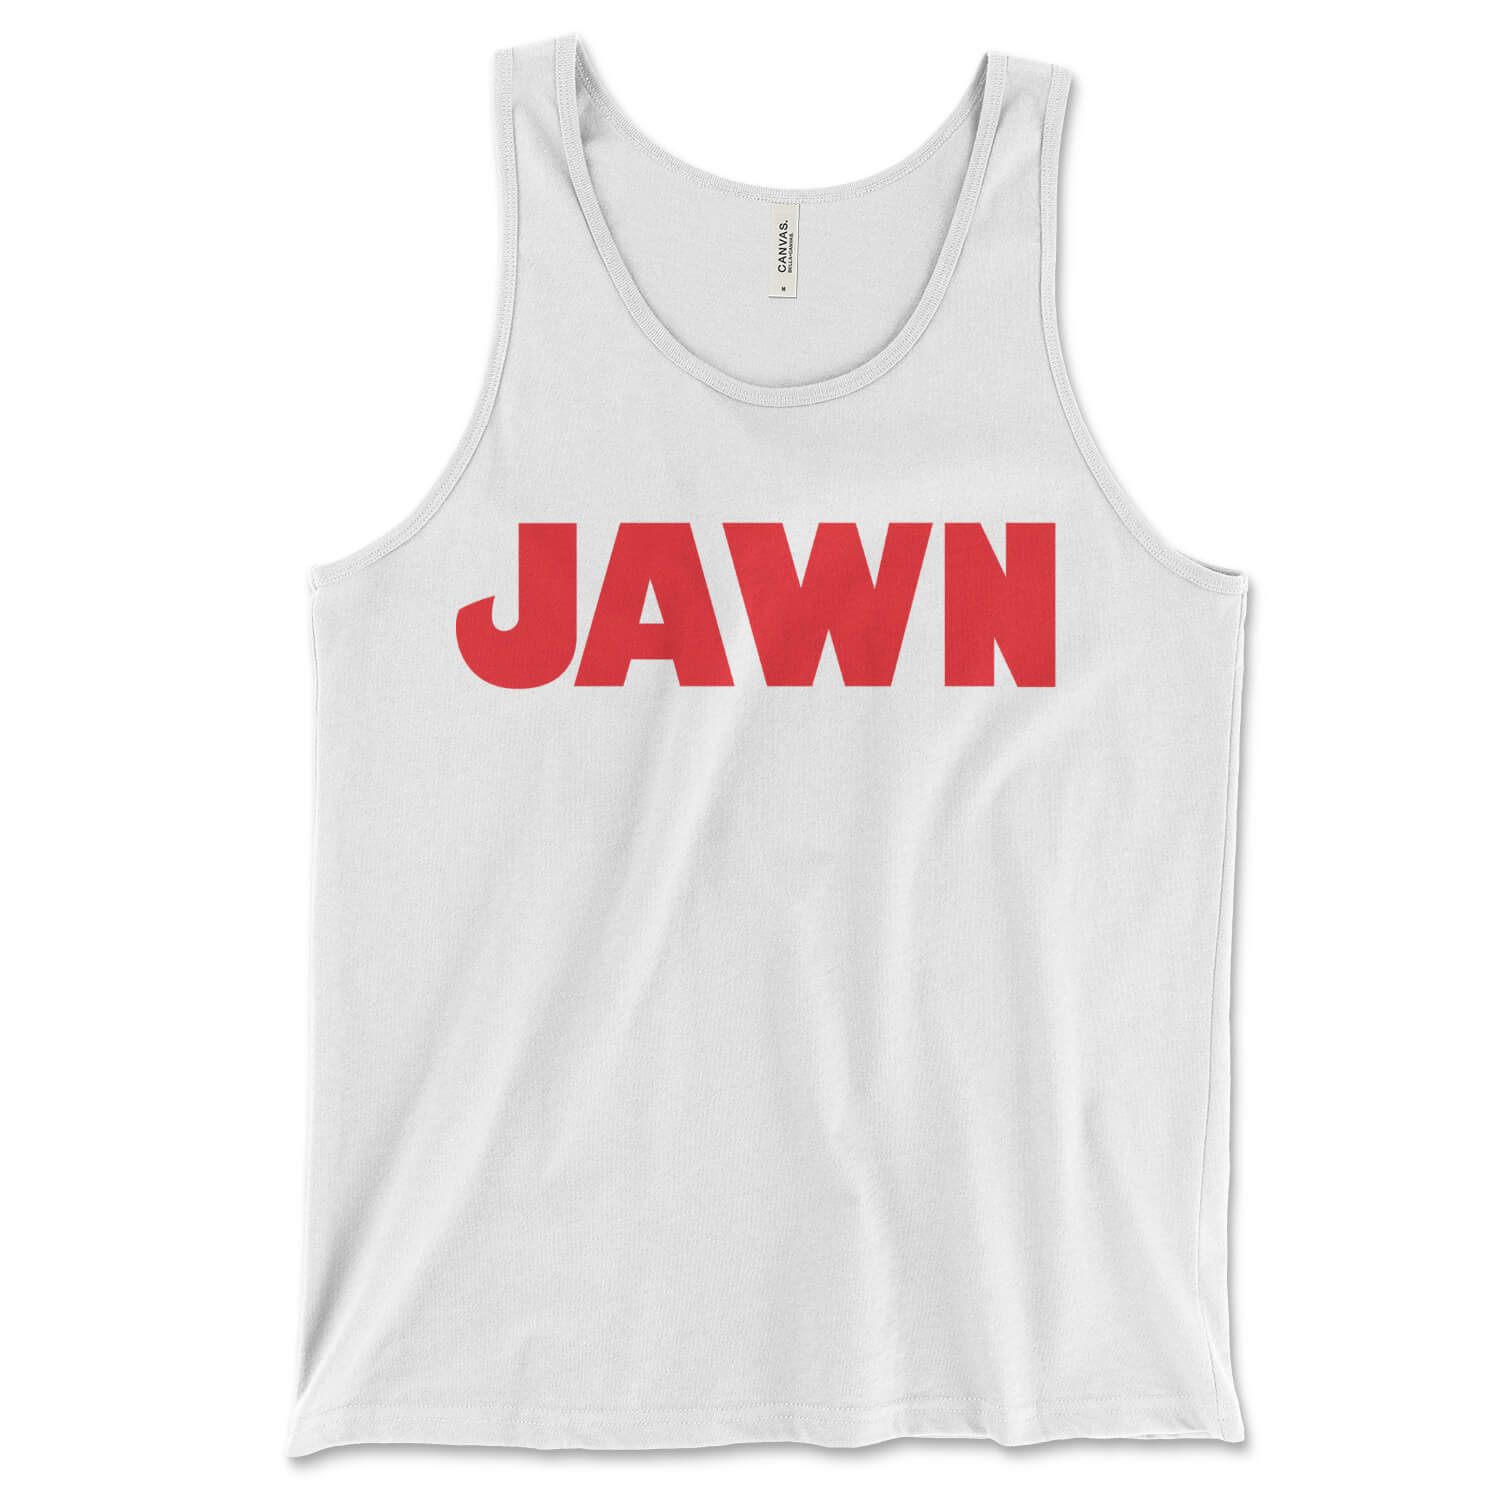 Philadelphia Philly jawn jaws white tank top from Phillygoat